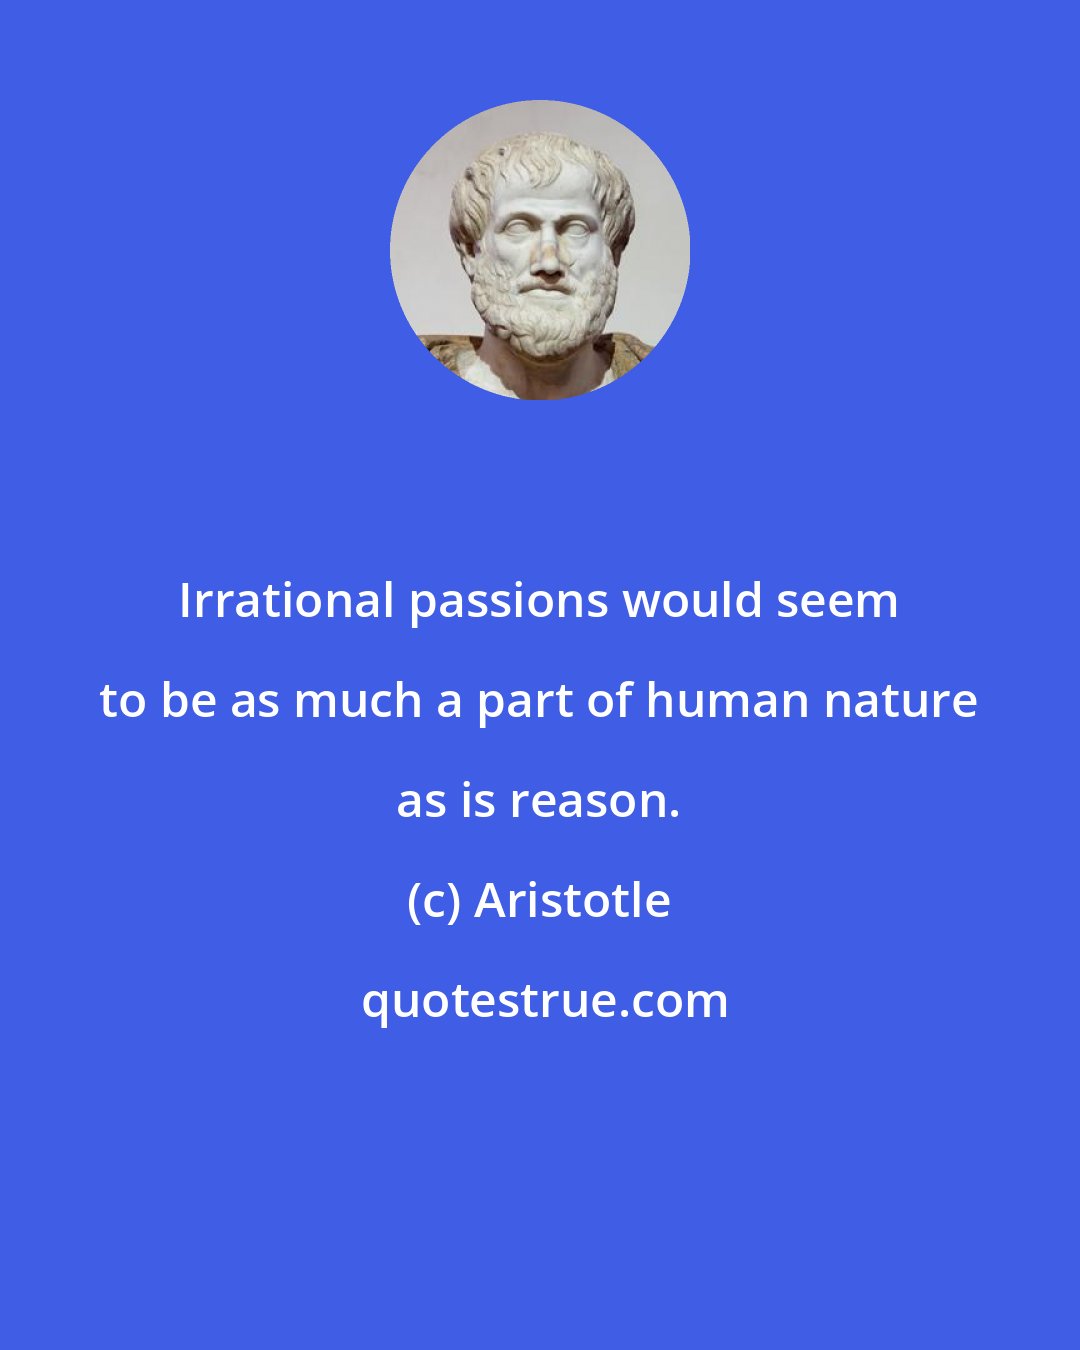 Aristotle: Irrational passions would seem to be as much a part of human nature as is reason.